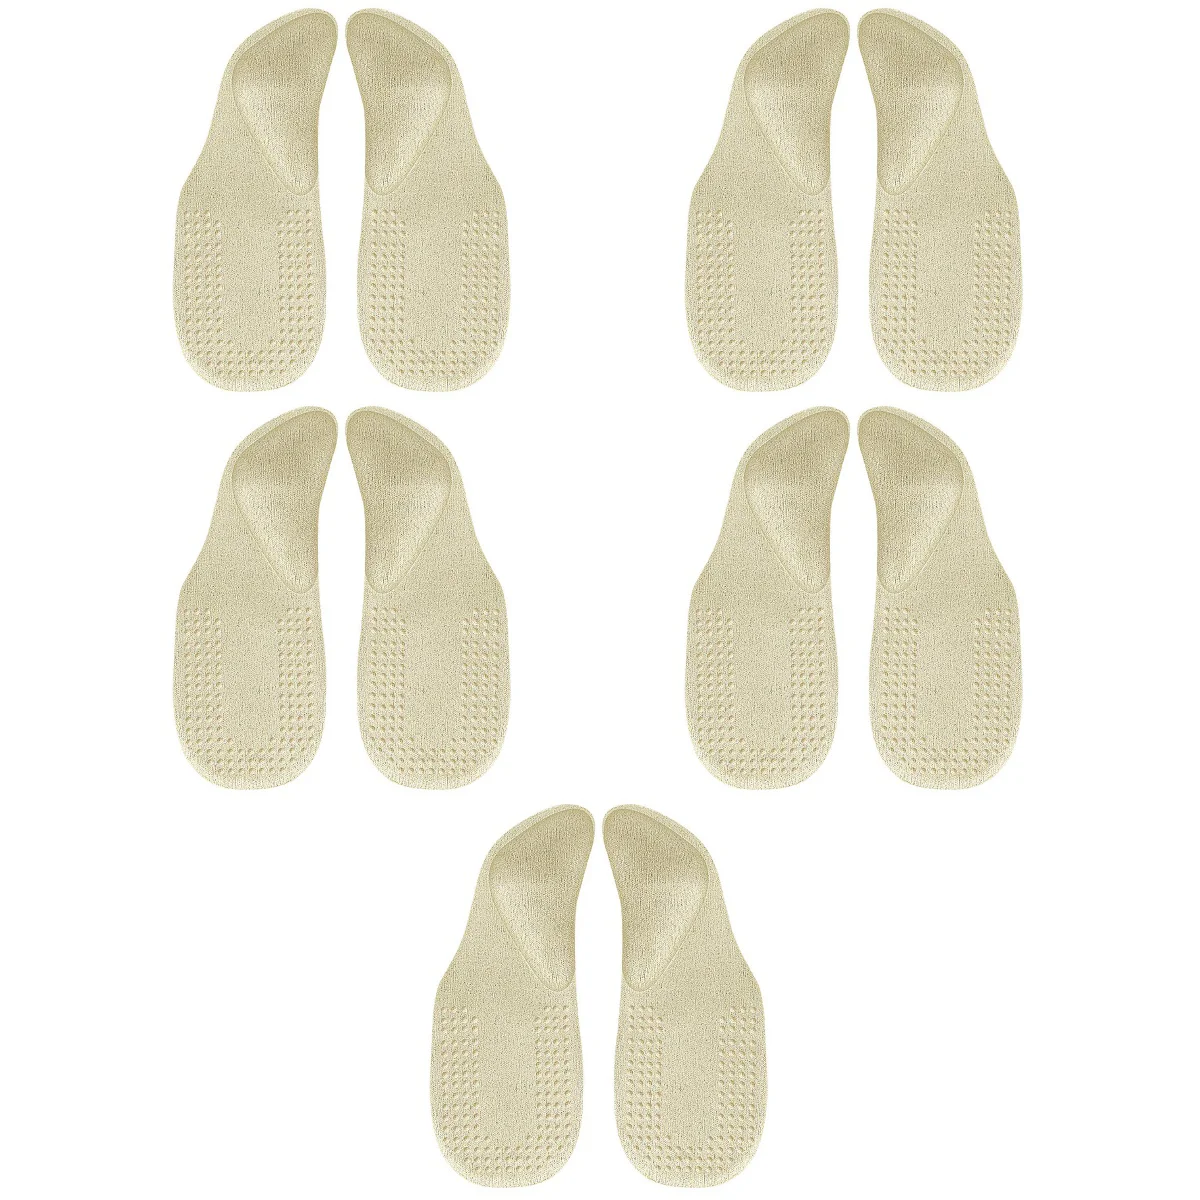 5 Pairs  Clear Shoes Heels of Practical Self-adhesive Shoe Heel Insole High Heel Arch Cushion Comfortable Gel Insoles